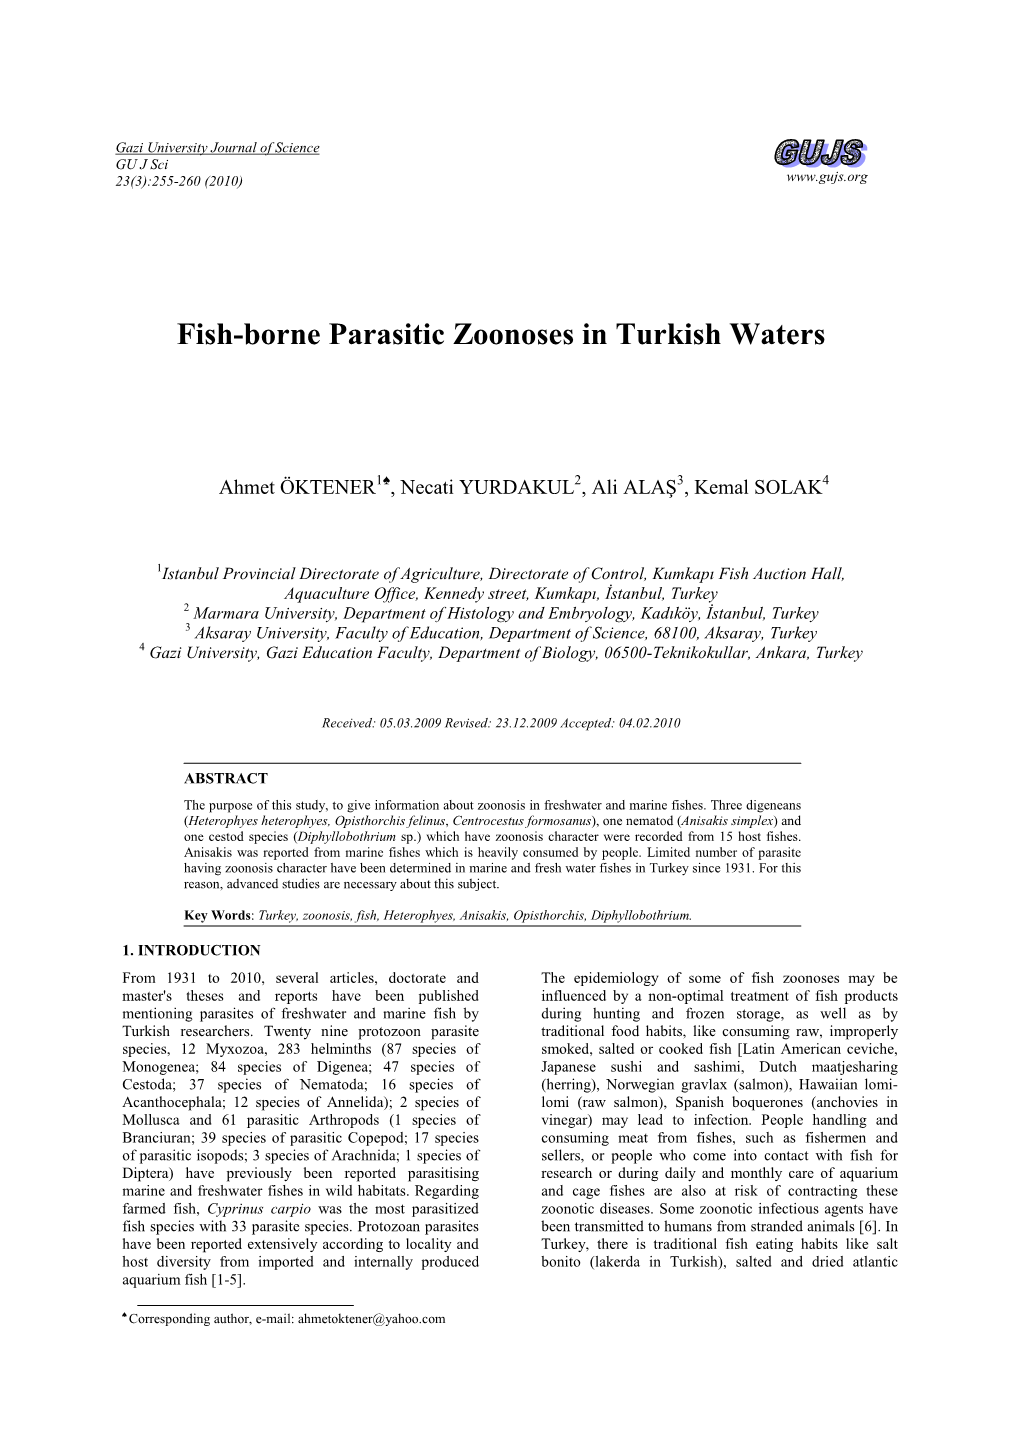 Fish-Borne Parasitic Zoonoses in Turkish Waters